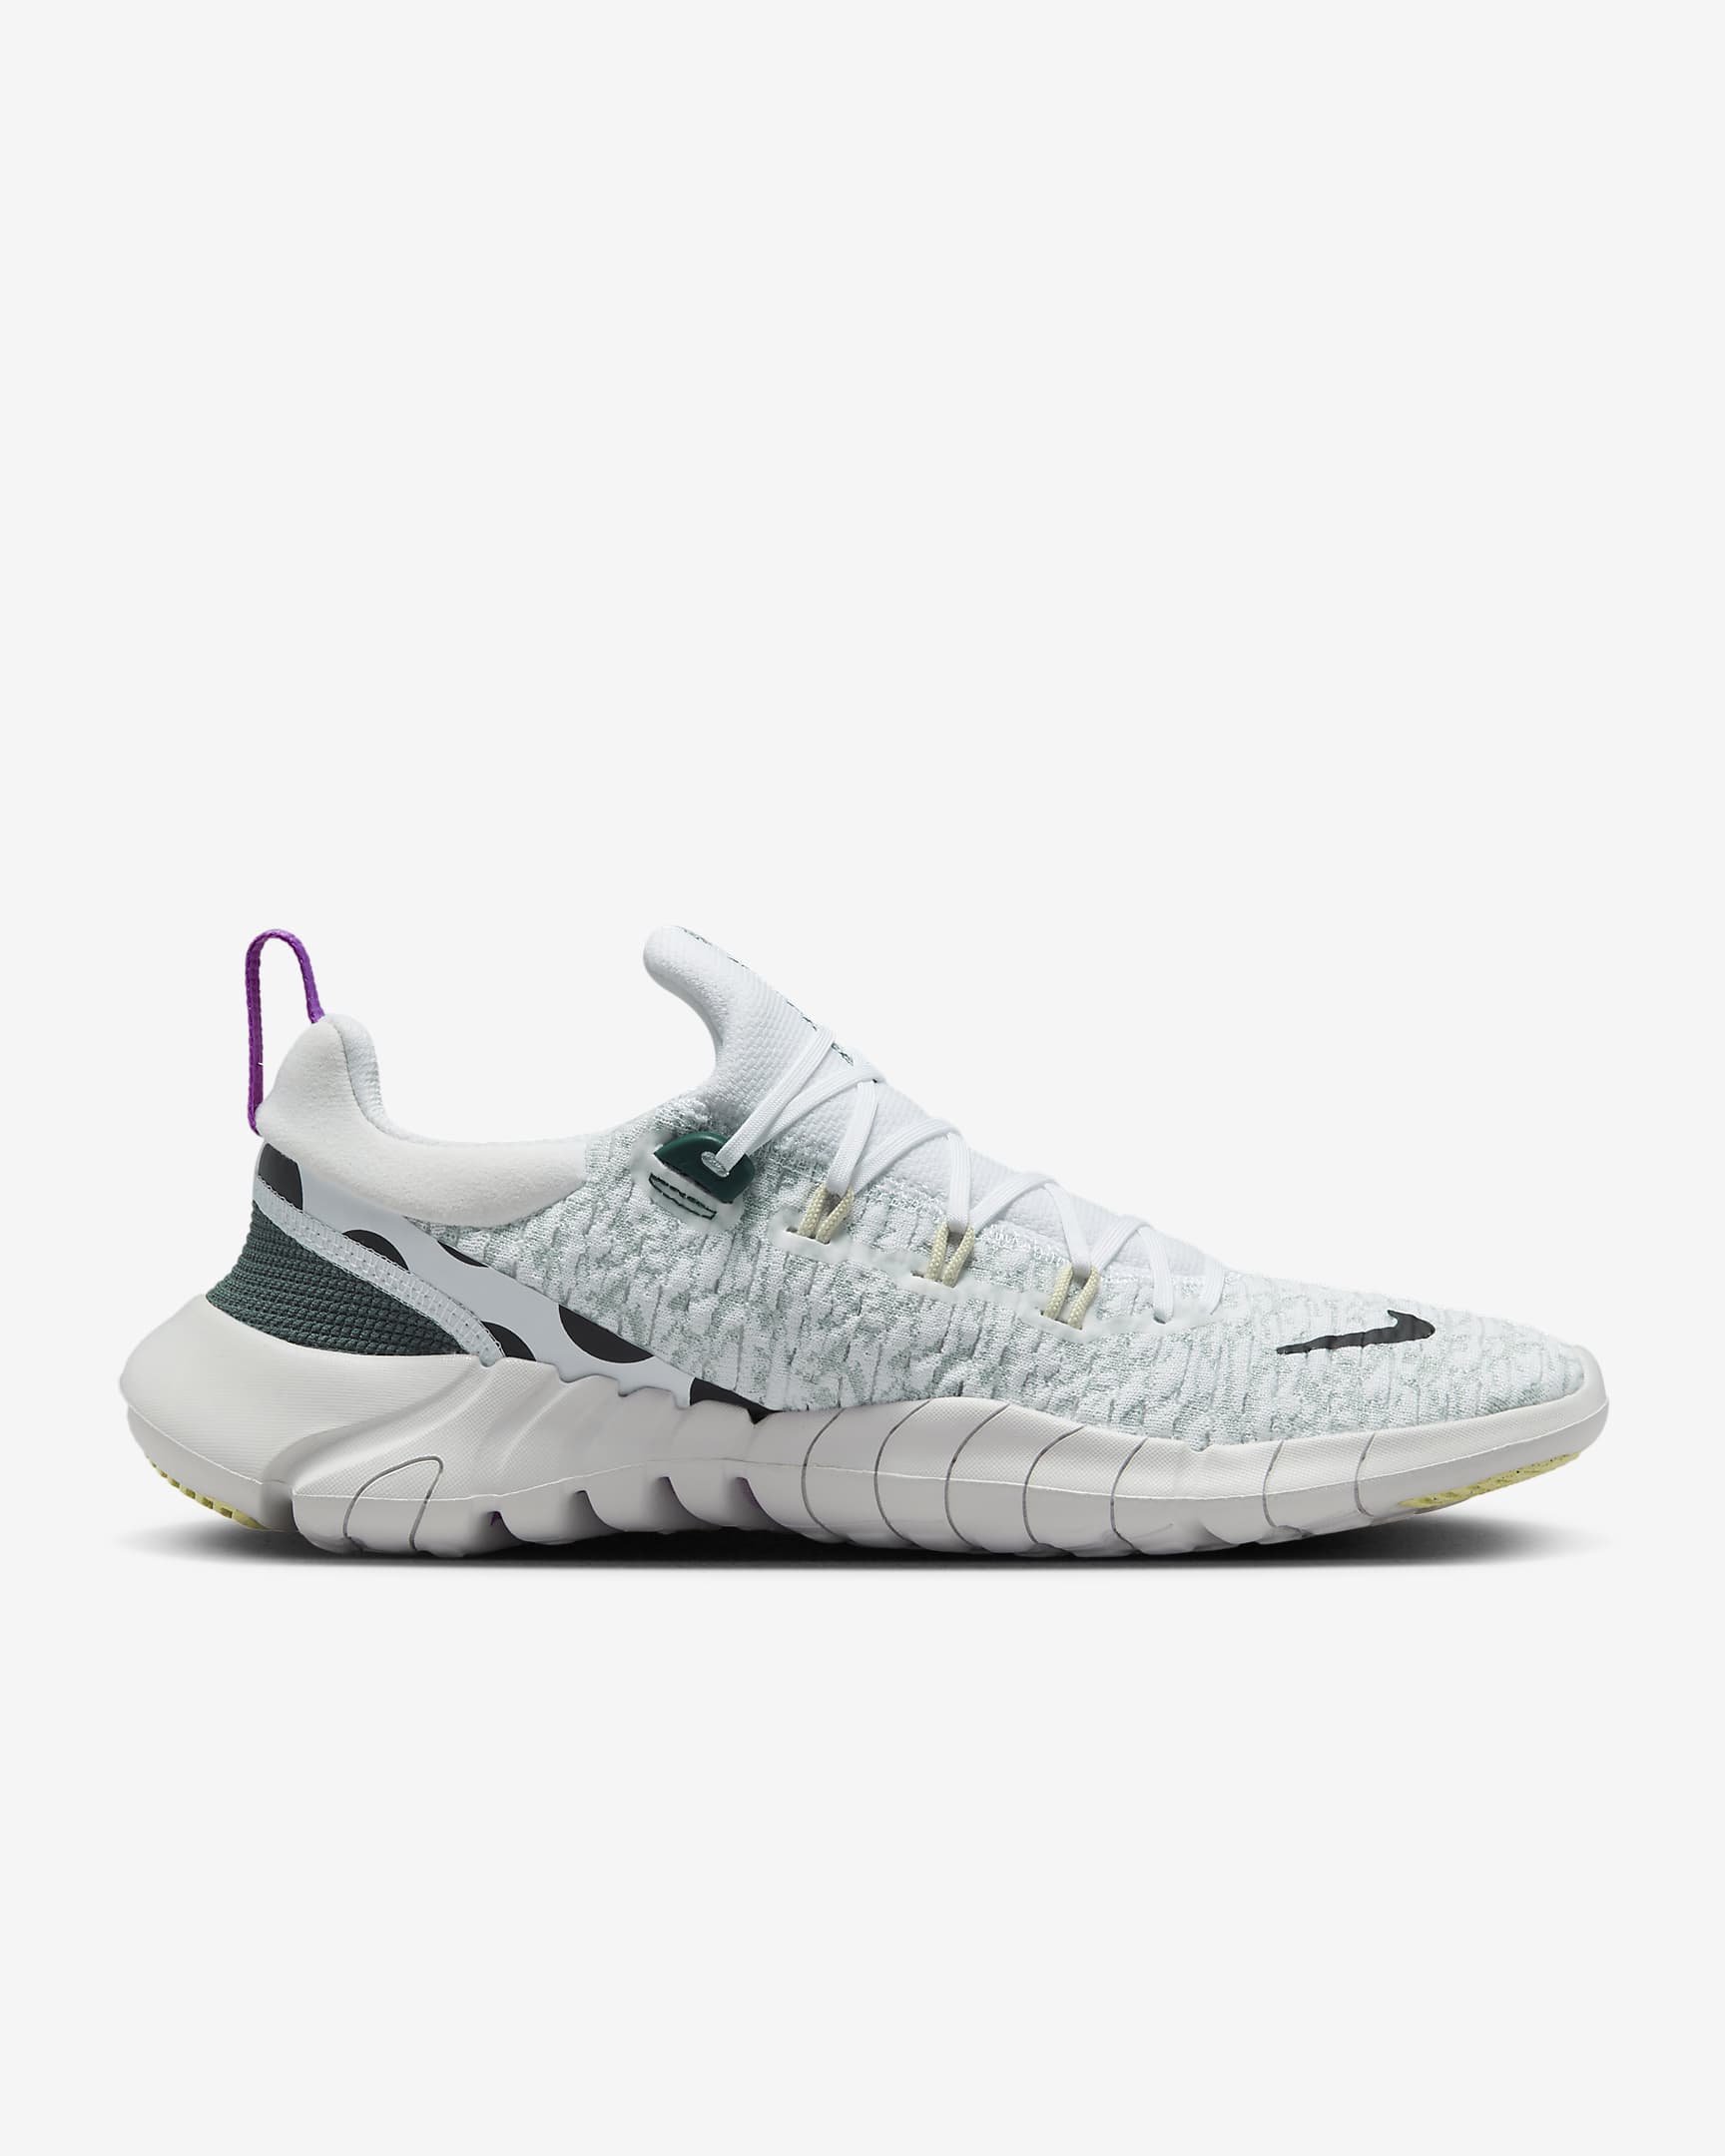 Nike Free Run 5.0 Men's Road Running Shoes - White/Light Silver/Faded Spruce/Black